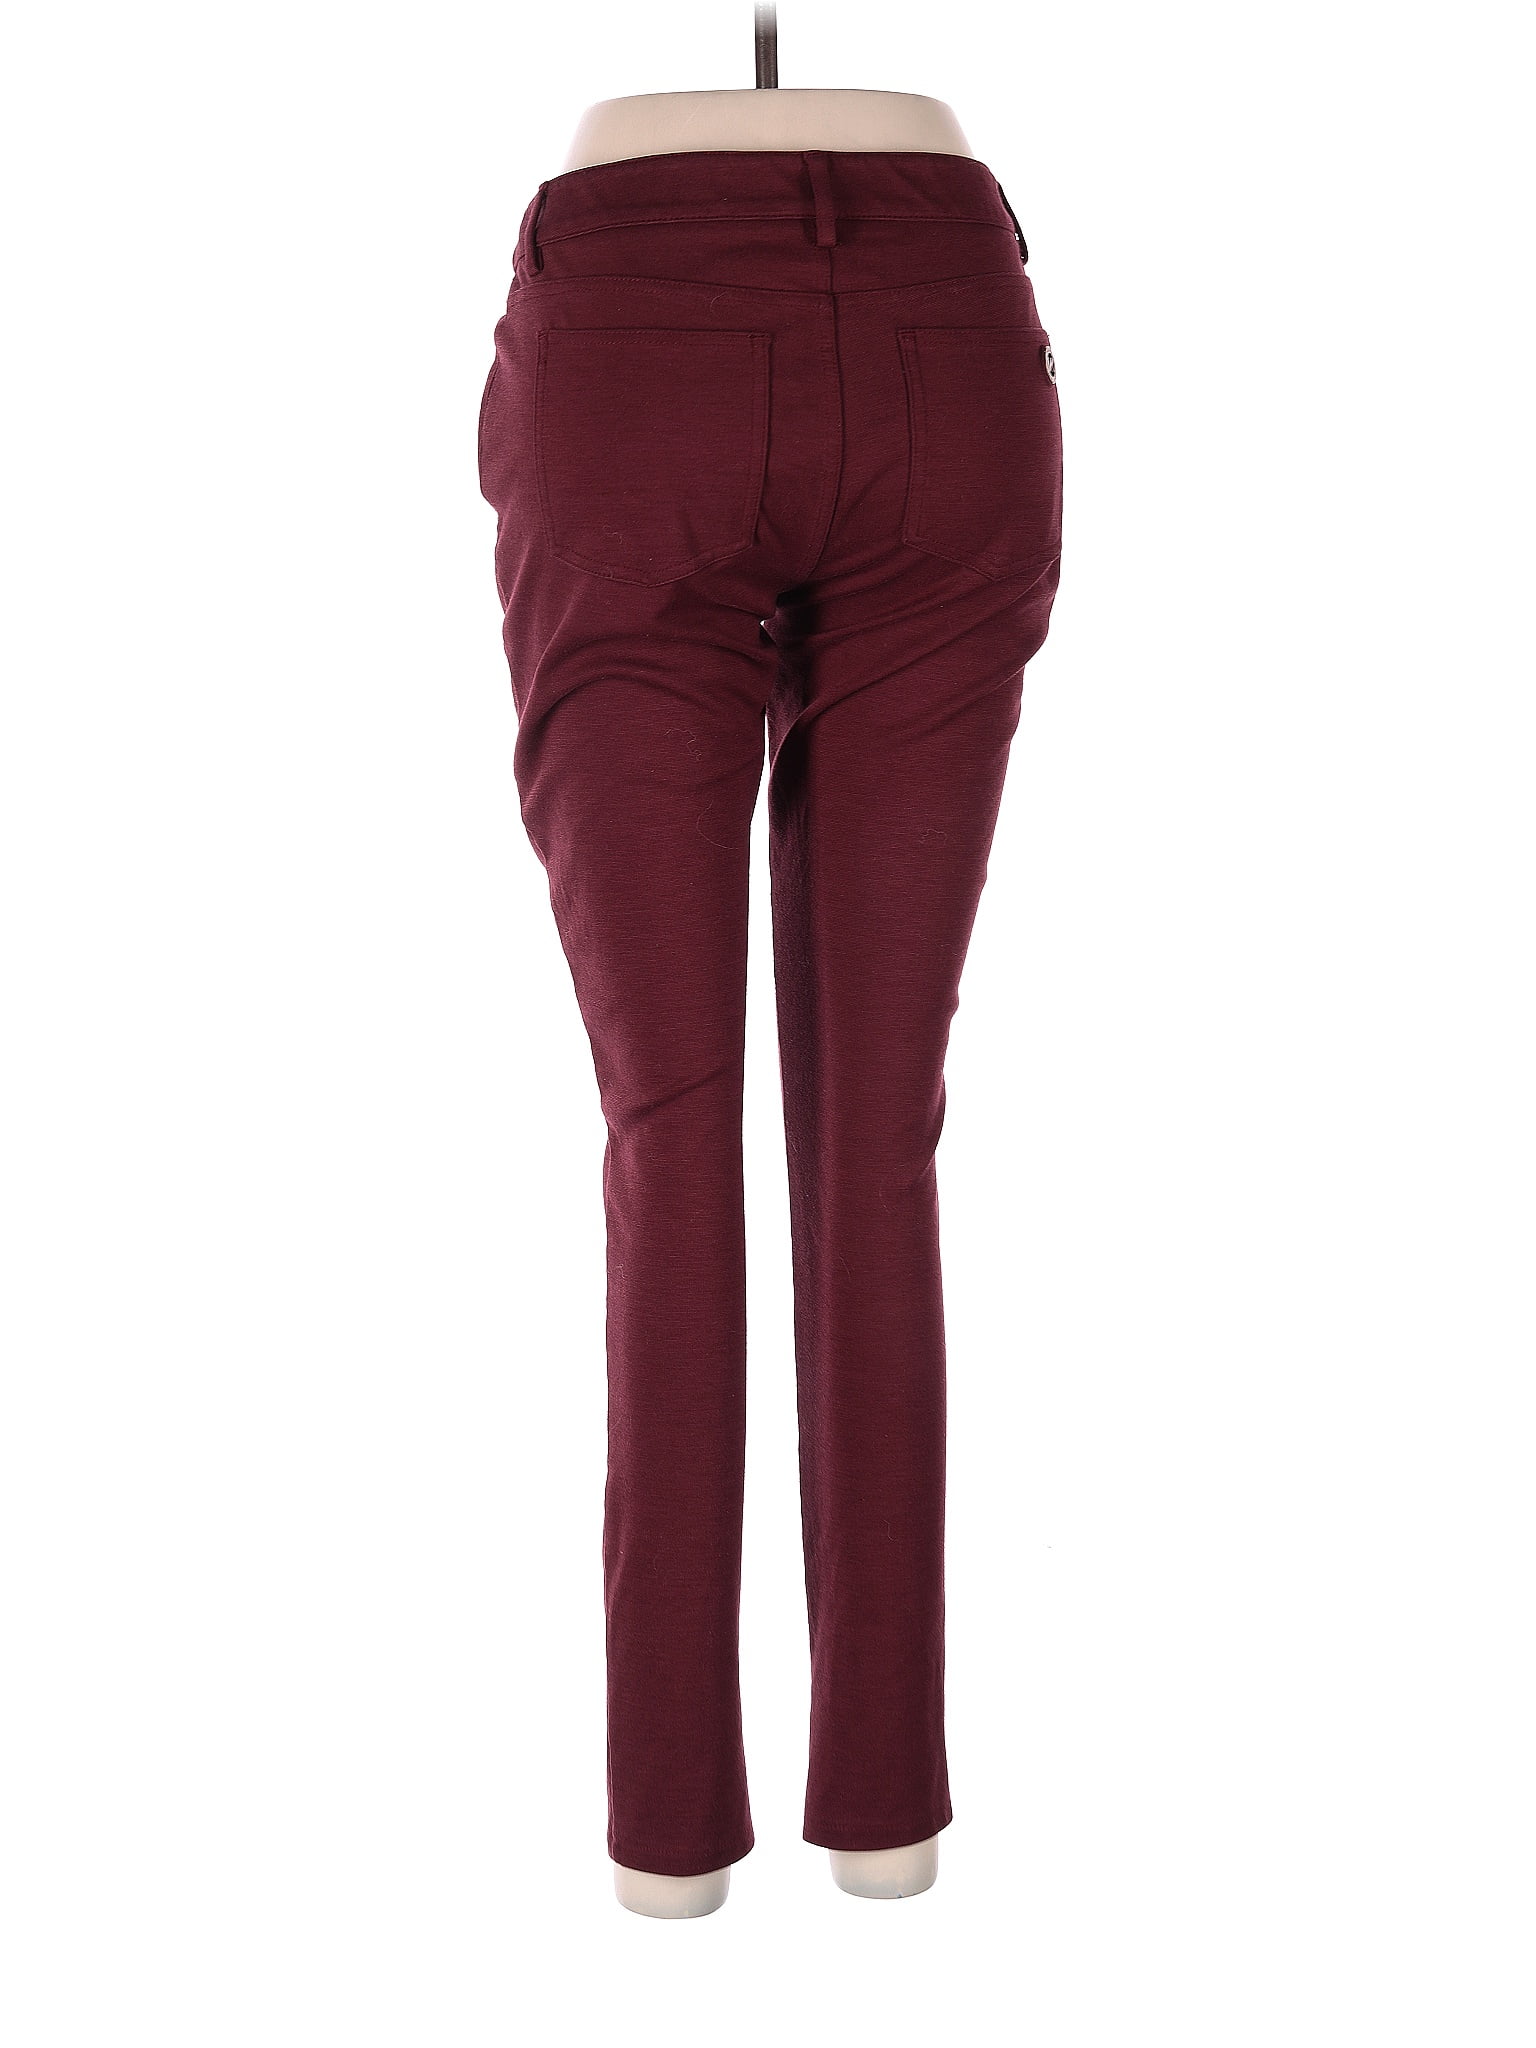 Lou & Grey for LOFT Solid Maroon Burgundy Casual Pants Size M - 69% off